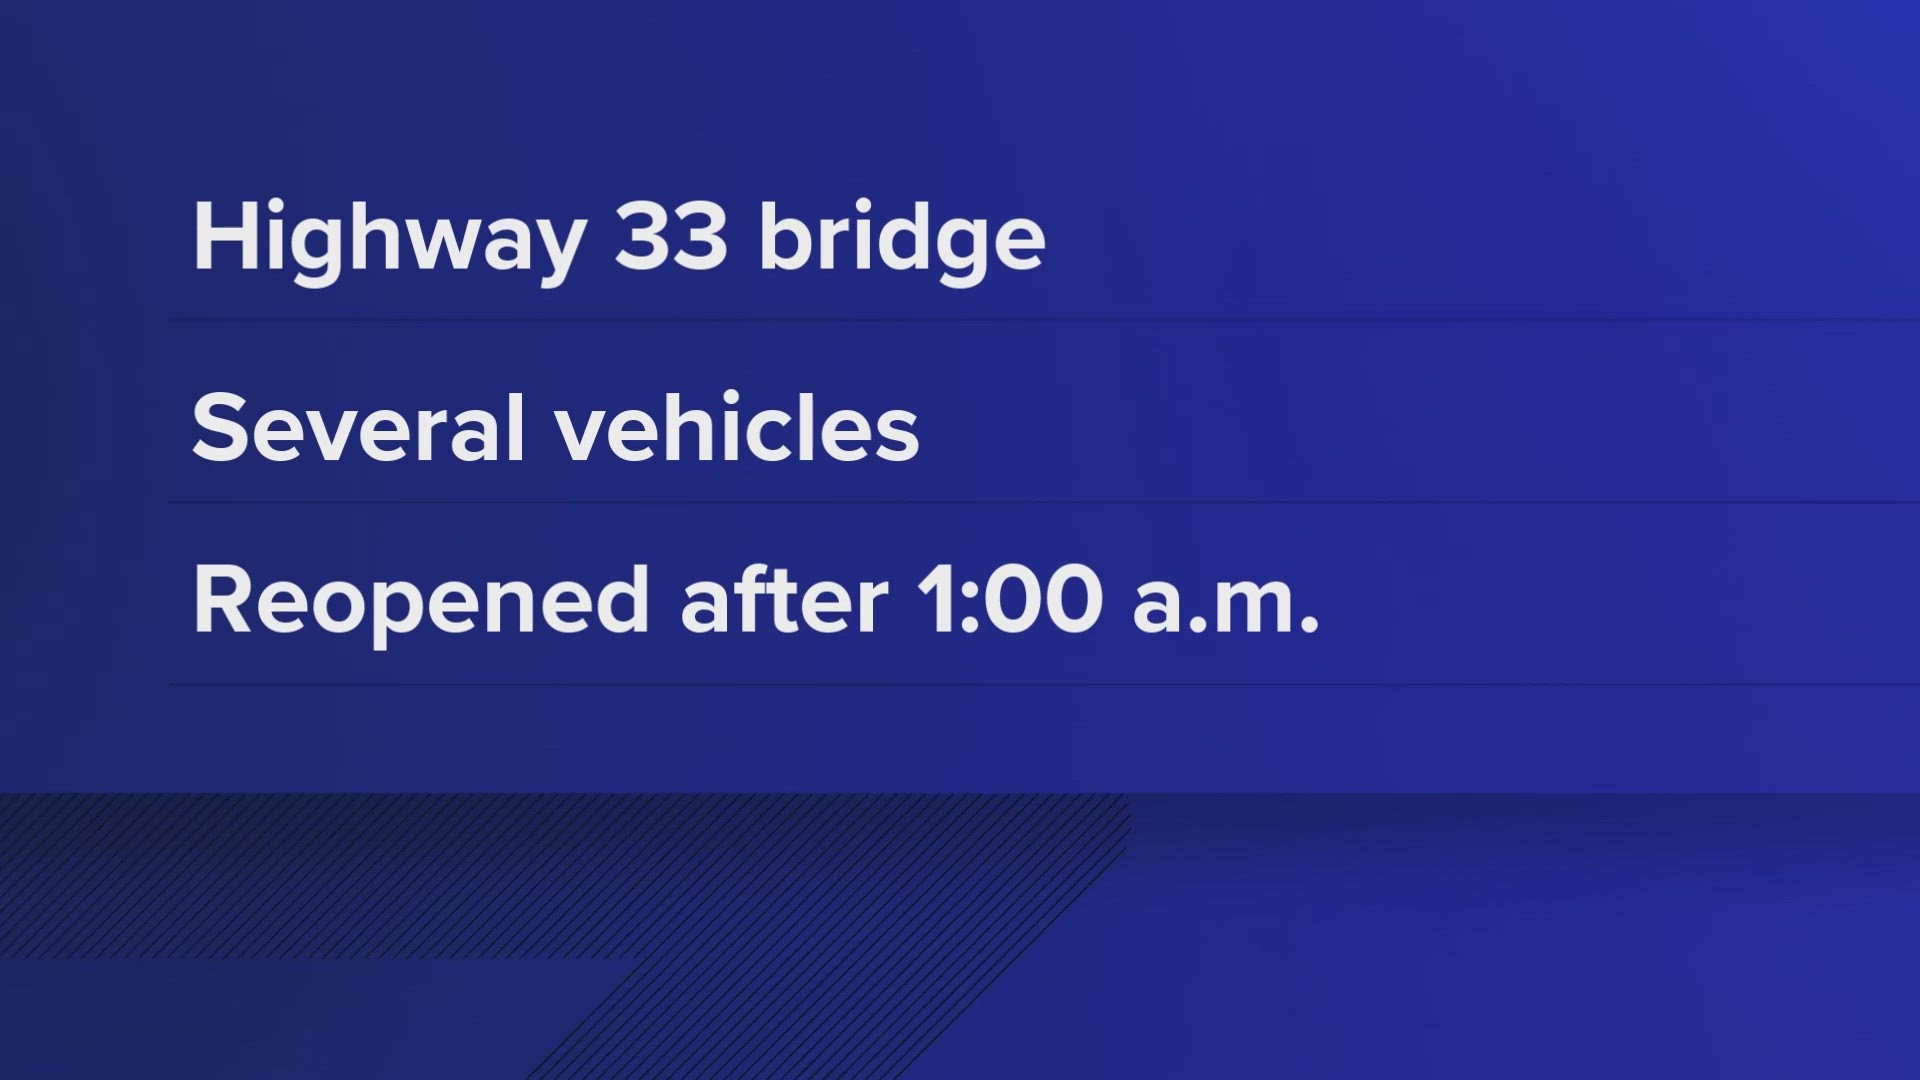 The wreck was reported around 5:37 p.m. on April 6, according to the Tennessee Department of Transportation.